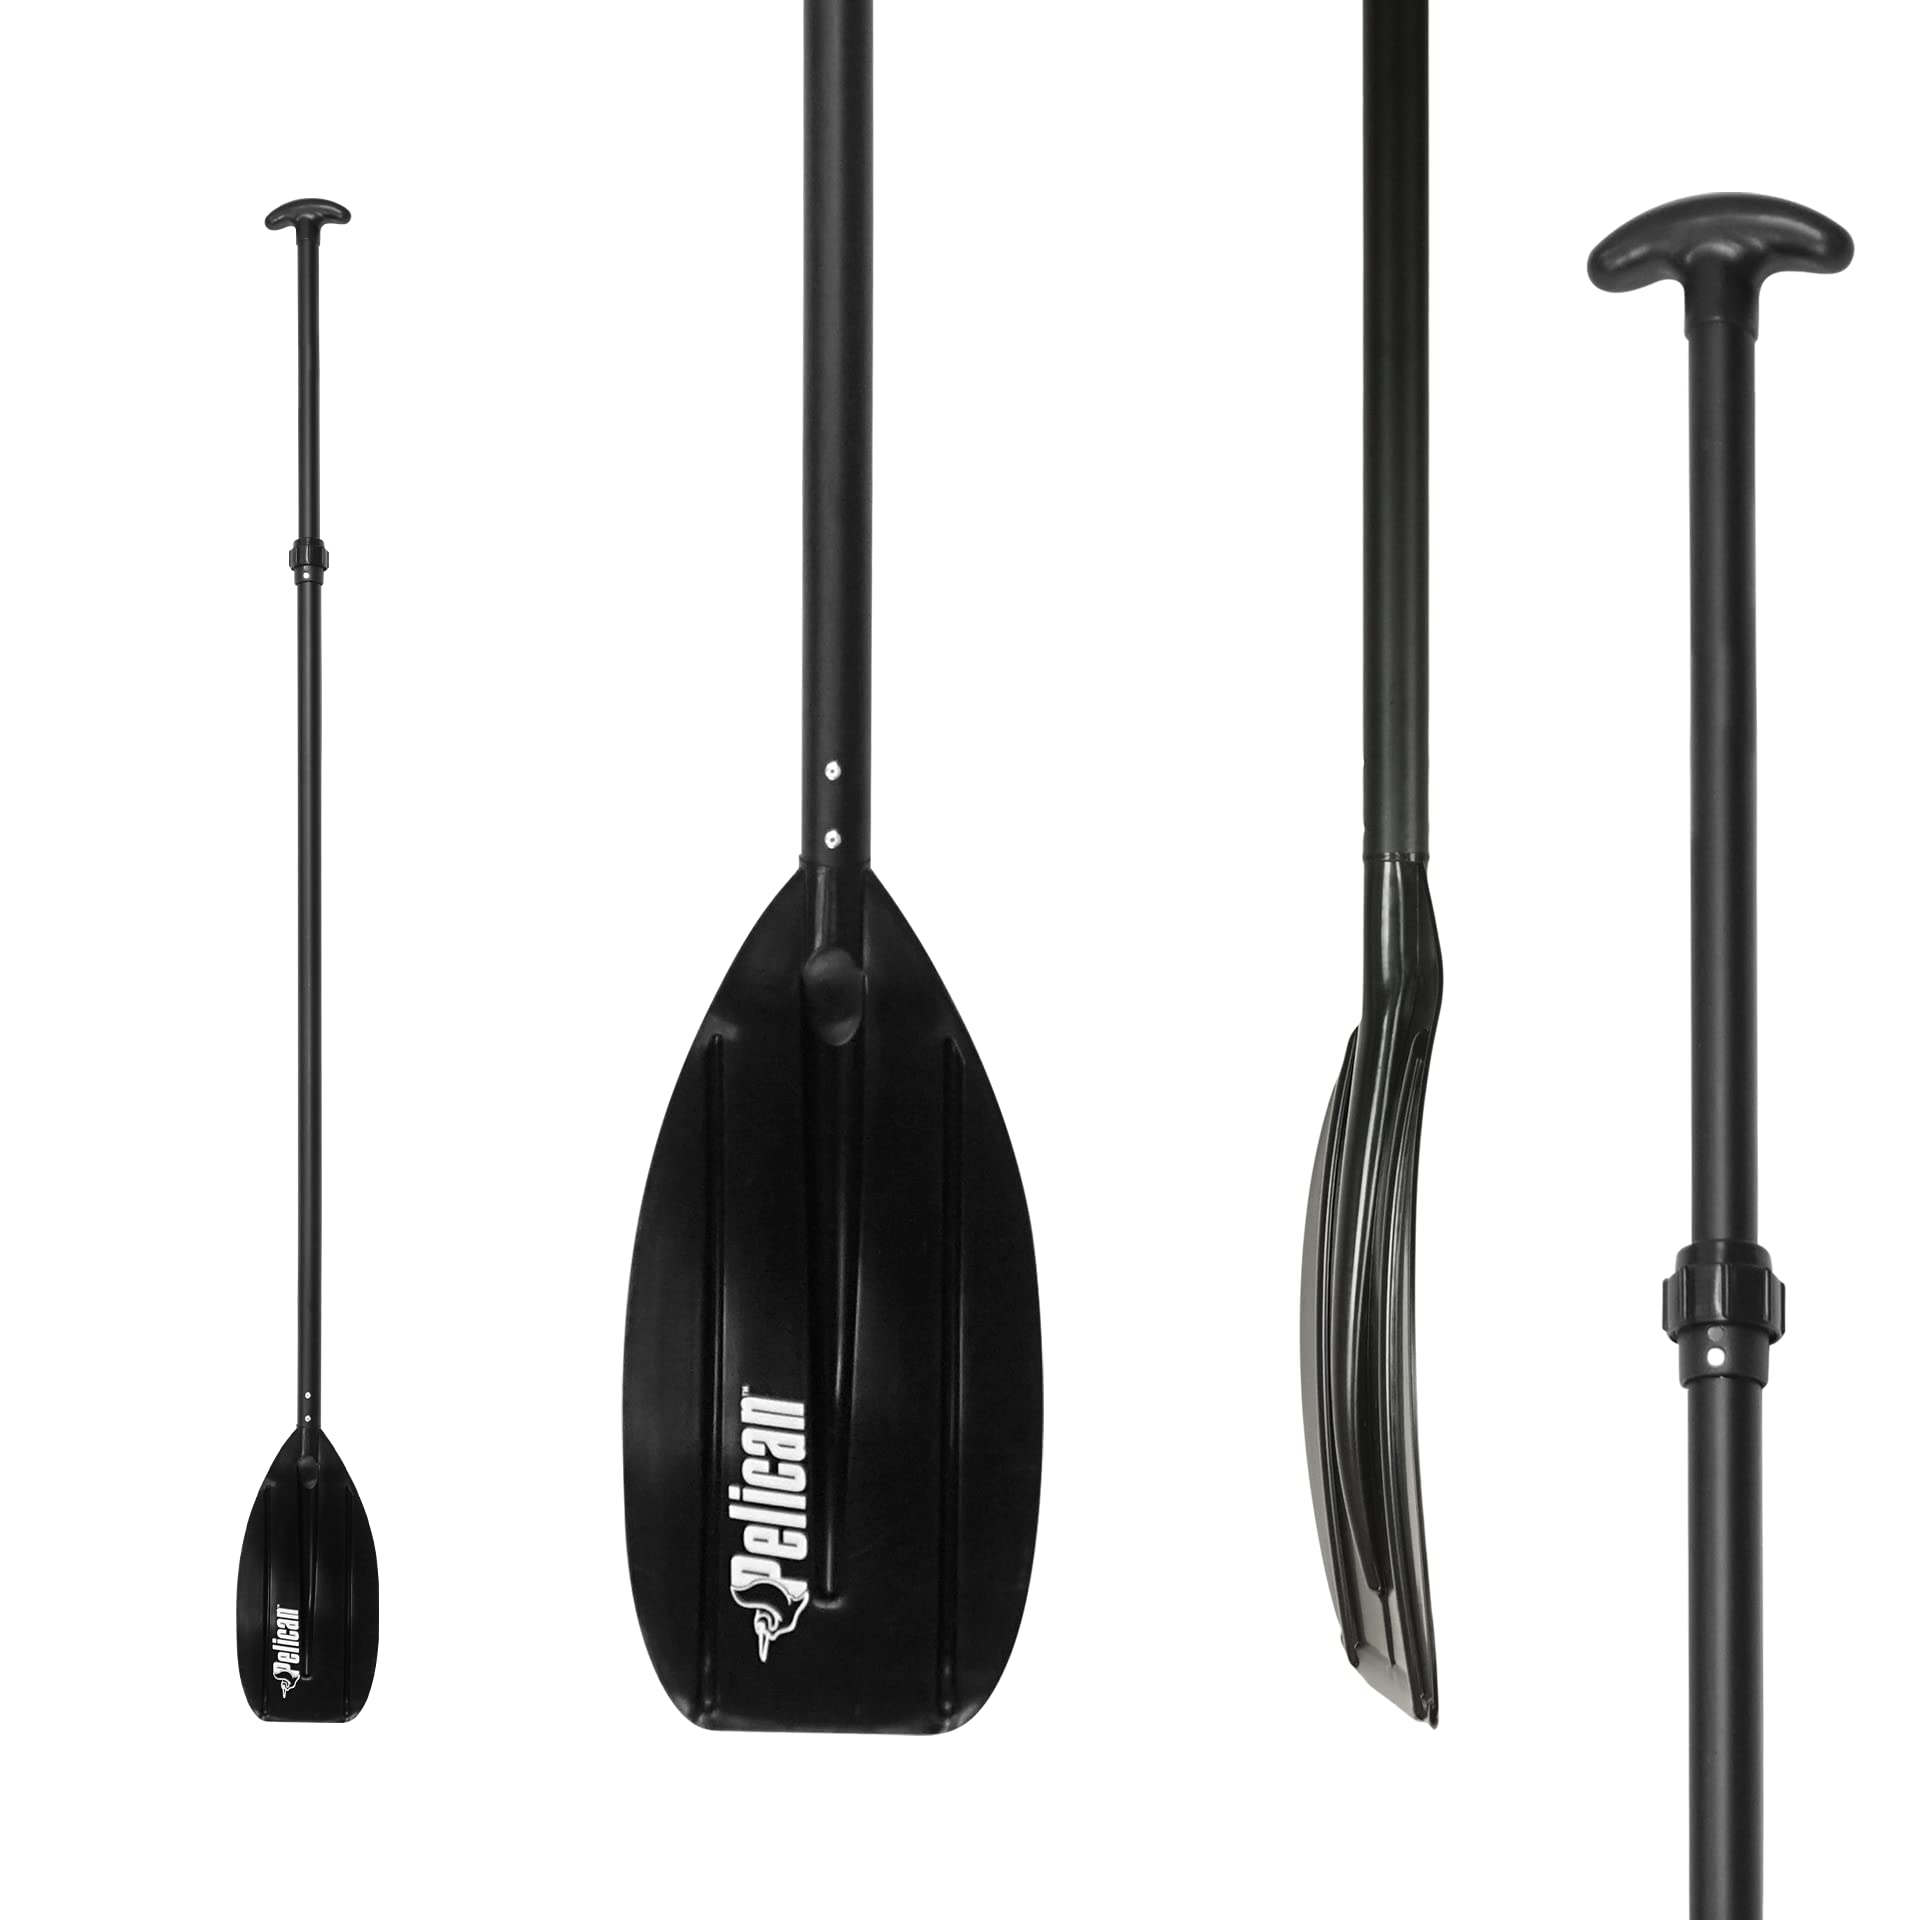 Pelican Boats - Adjustable Junior Kid SUP Paddle (Stand Up Paddle